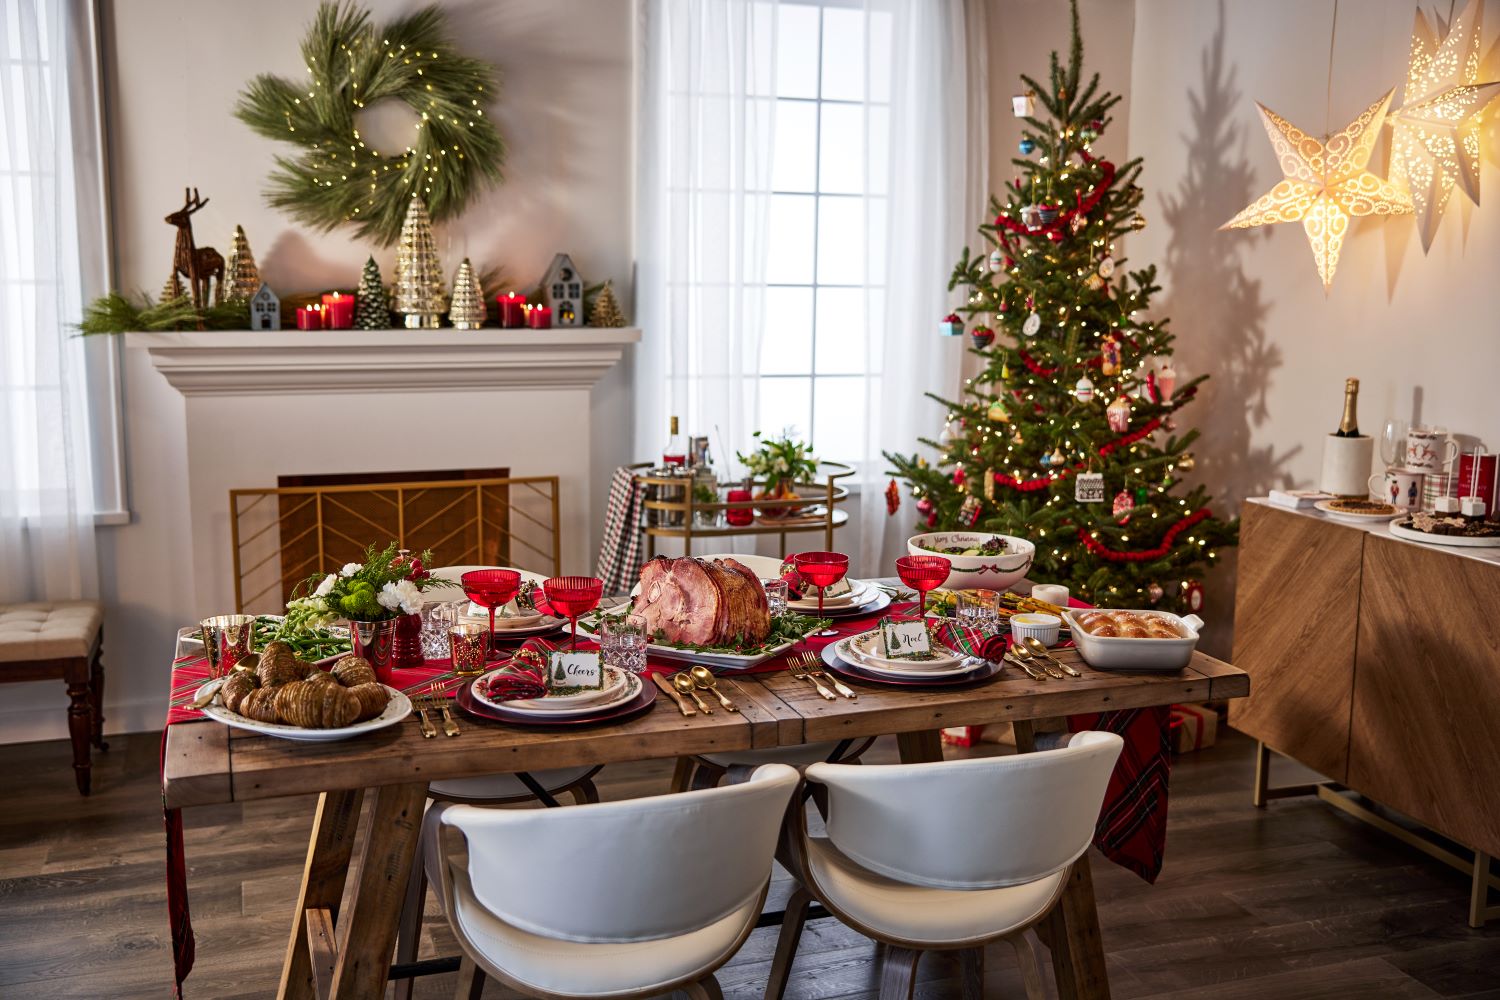 Martha Stewart's 5 Tips for Throwing a Holly Jolly Holiday Party